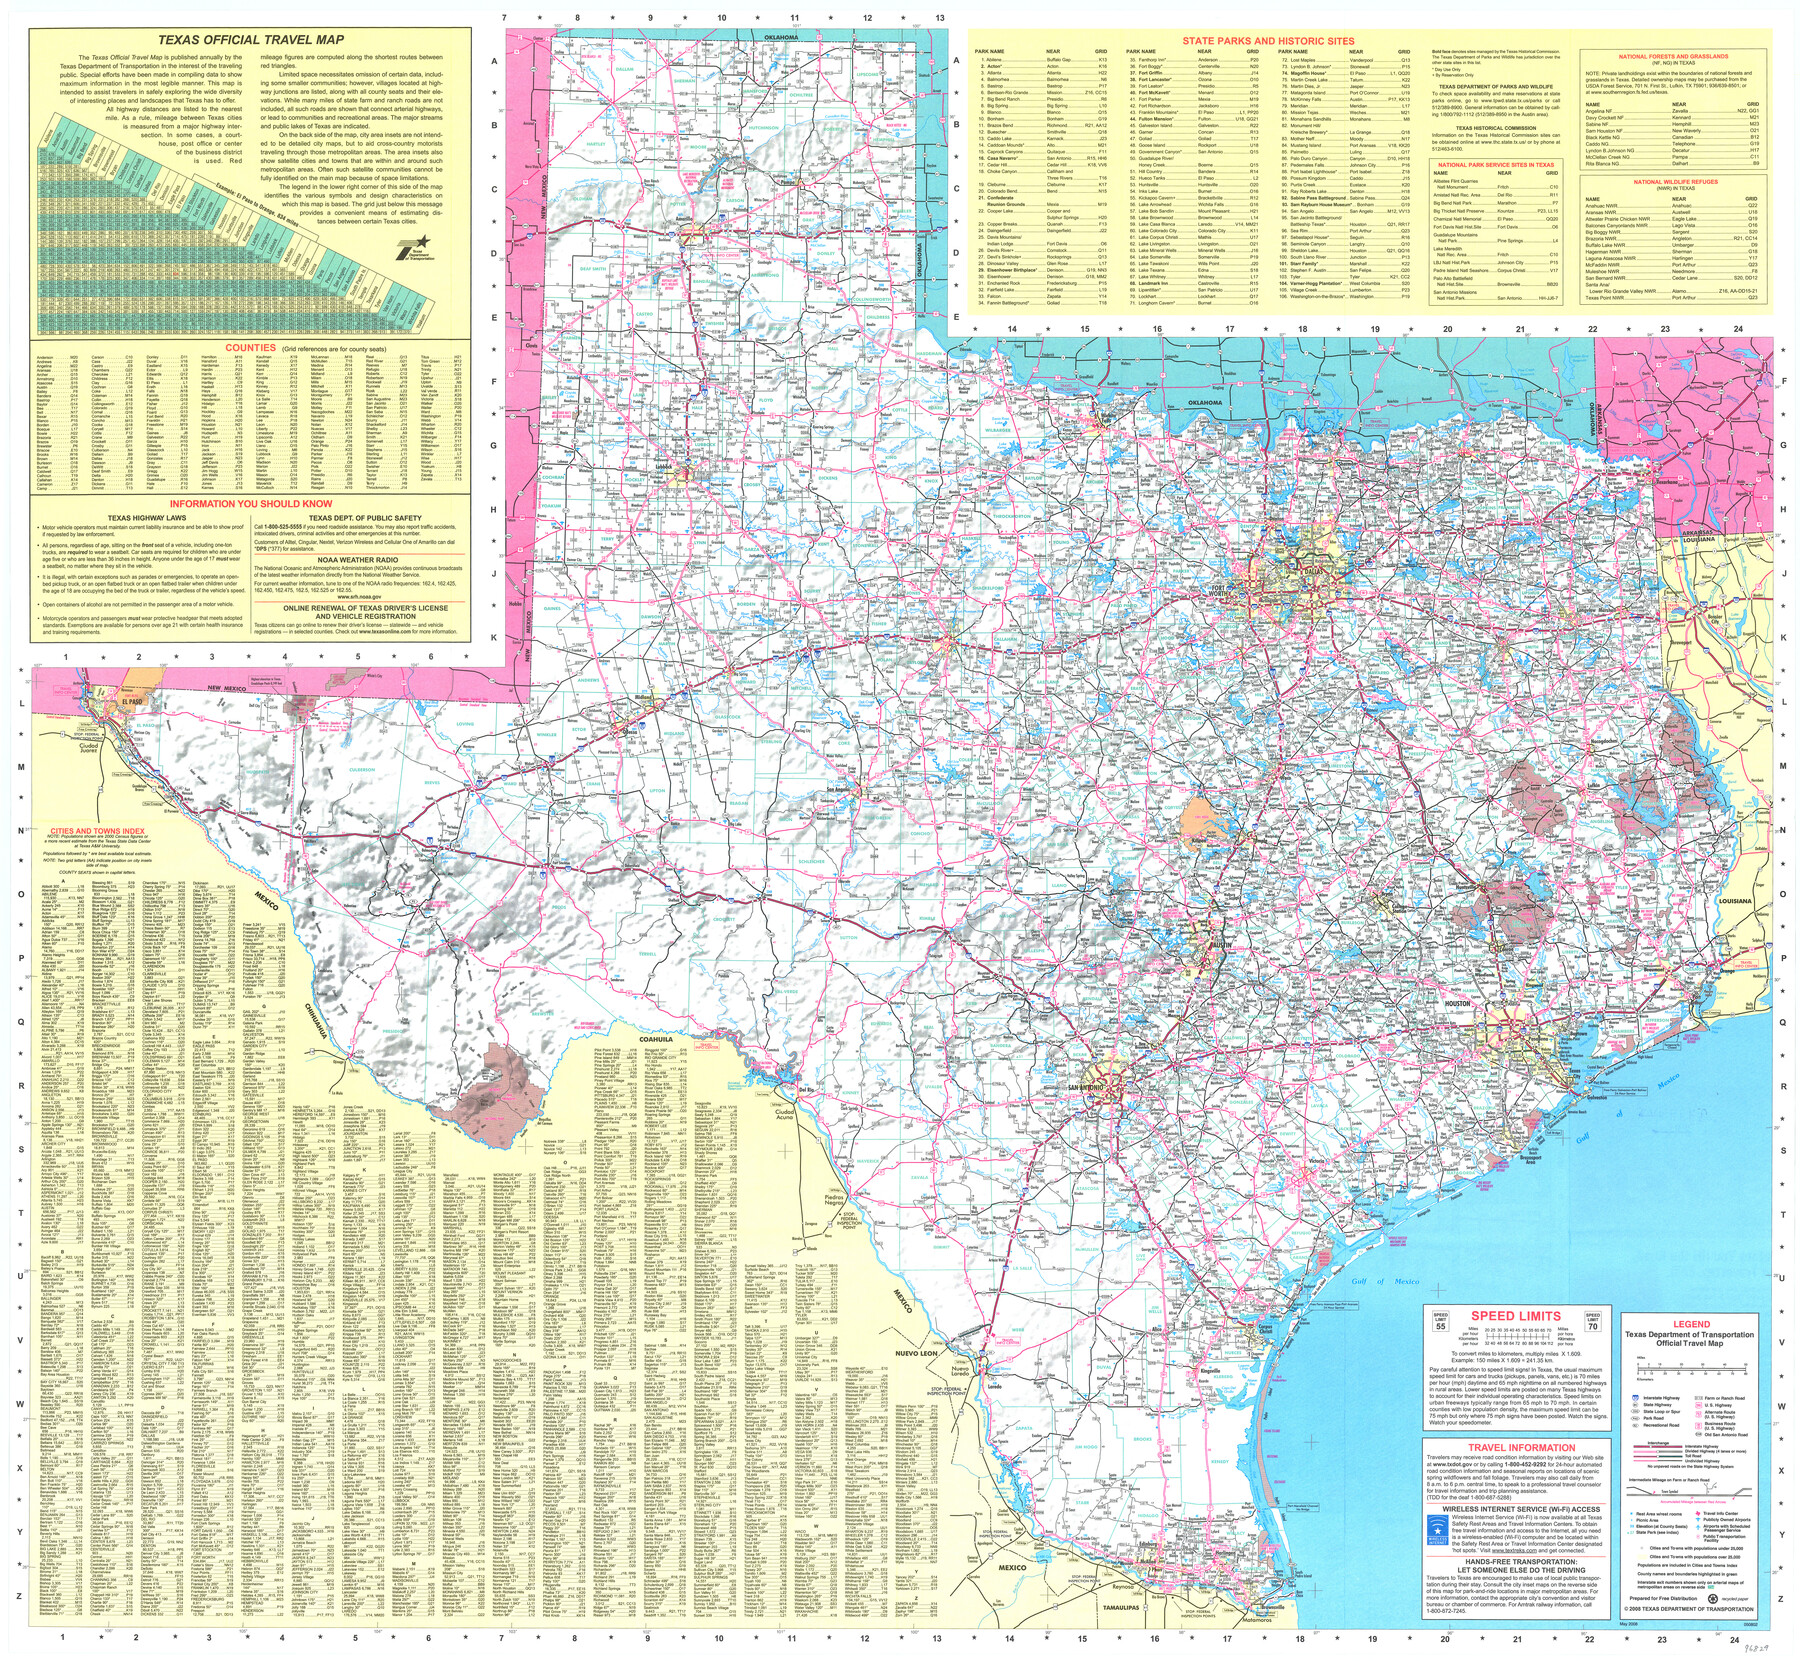 96829, Texas Official Travel Map, General Map Collection